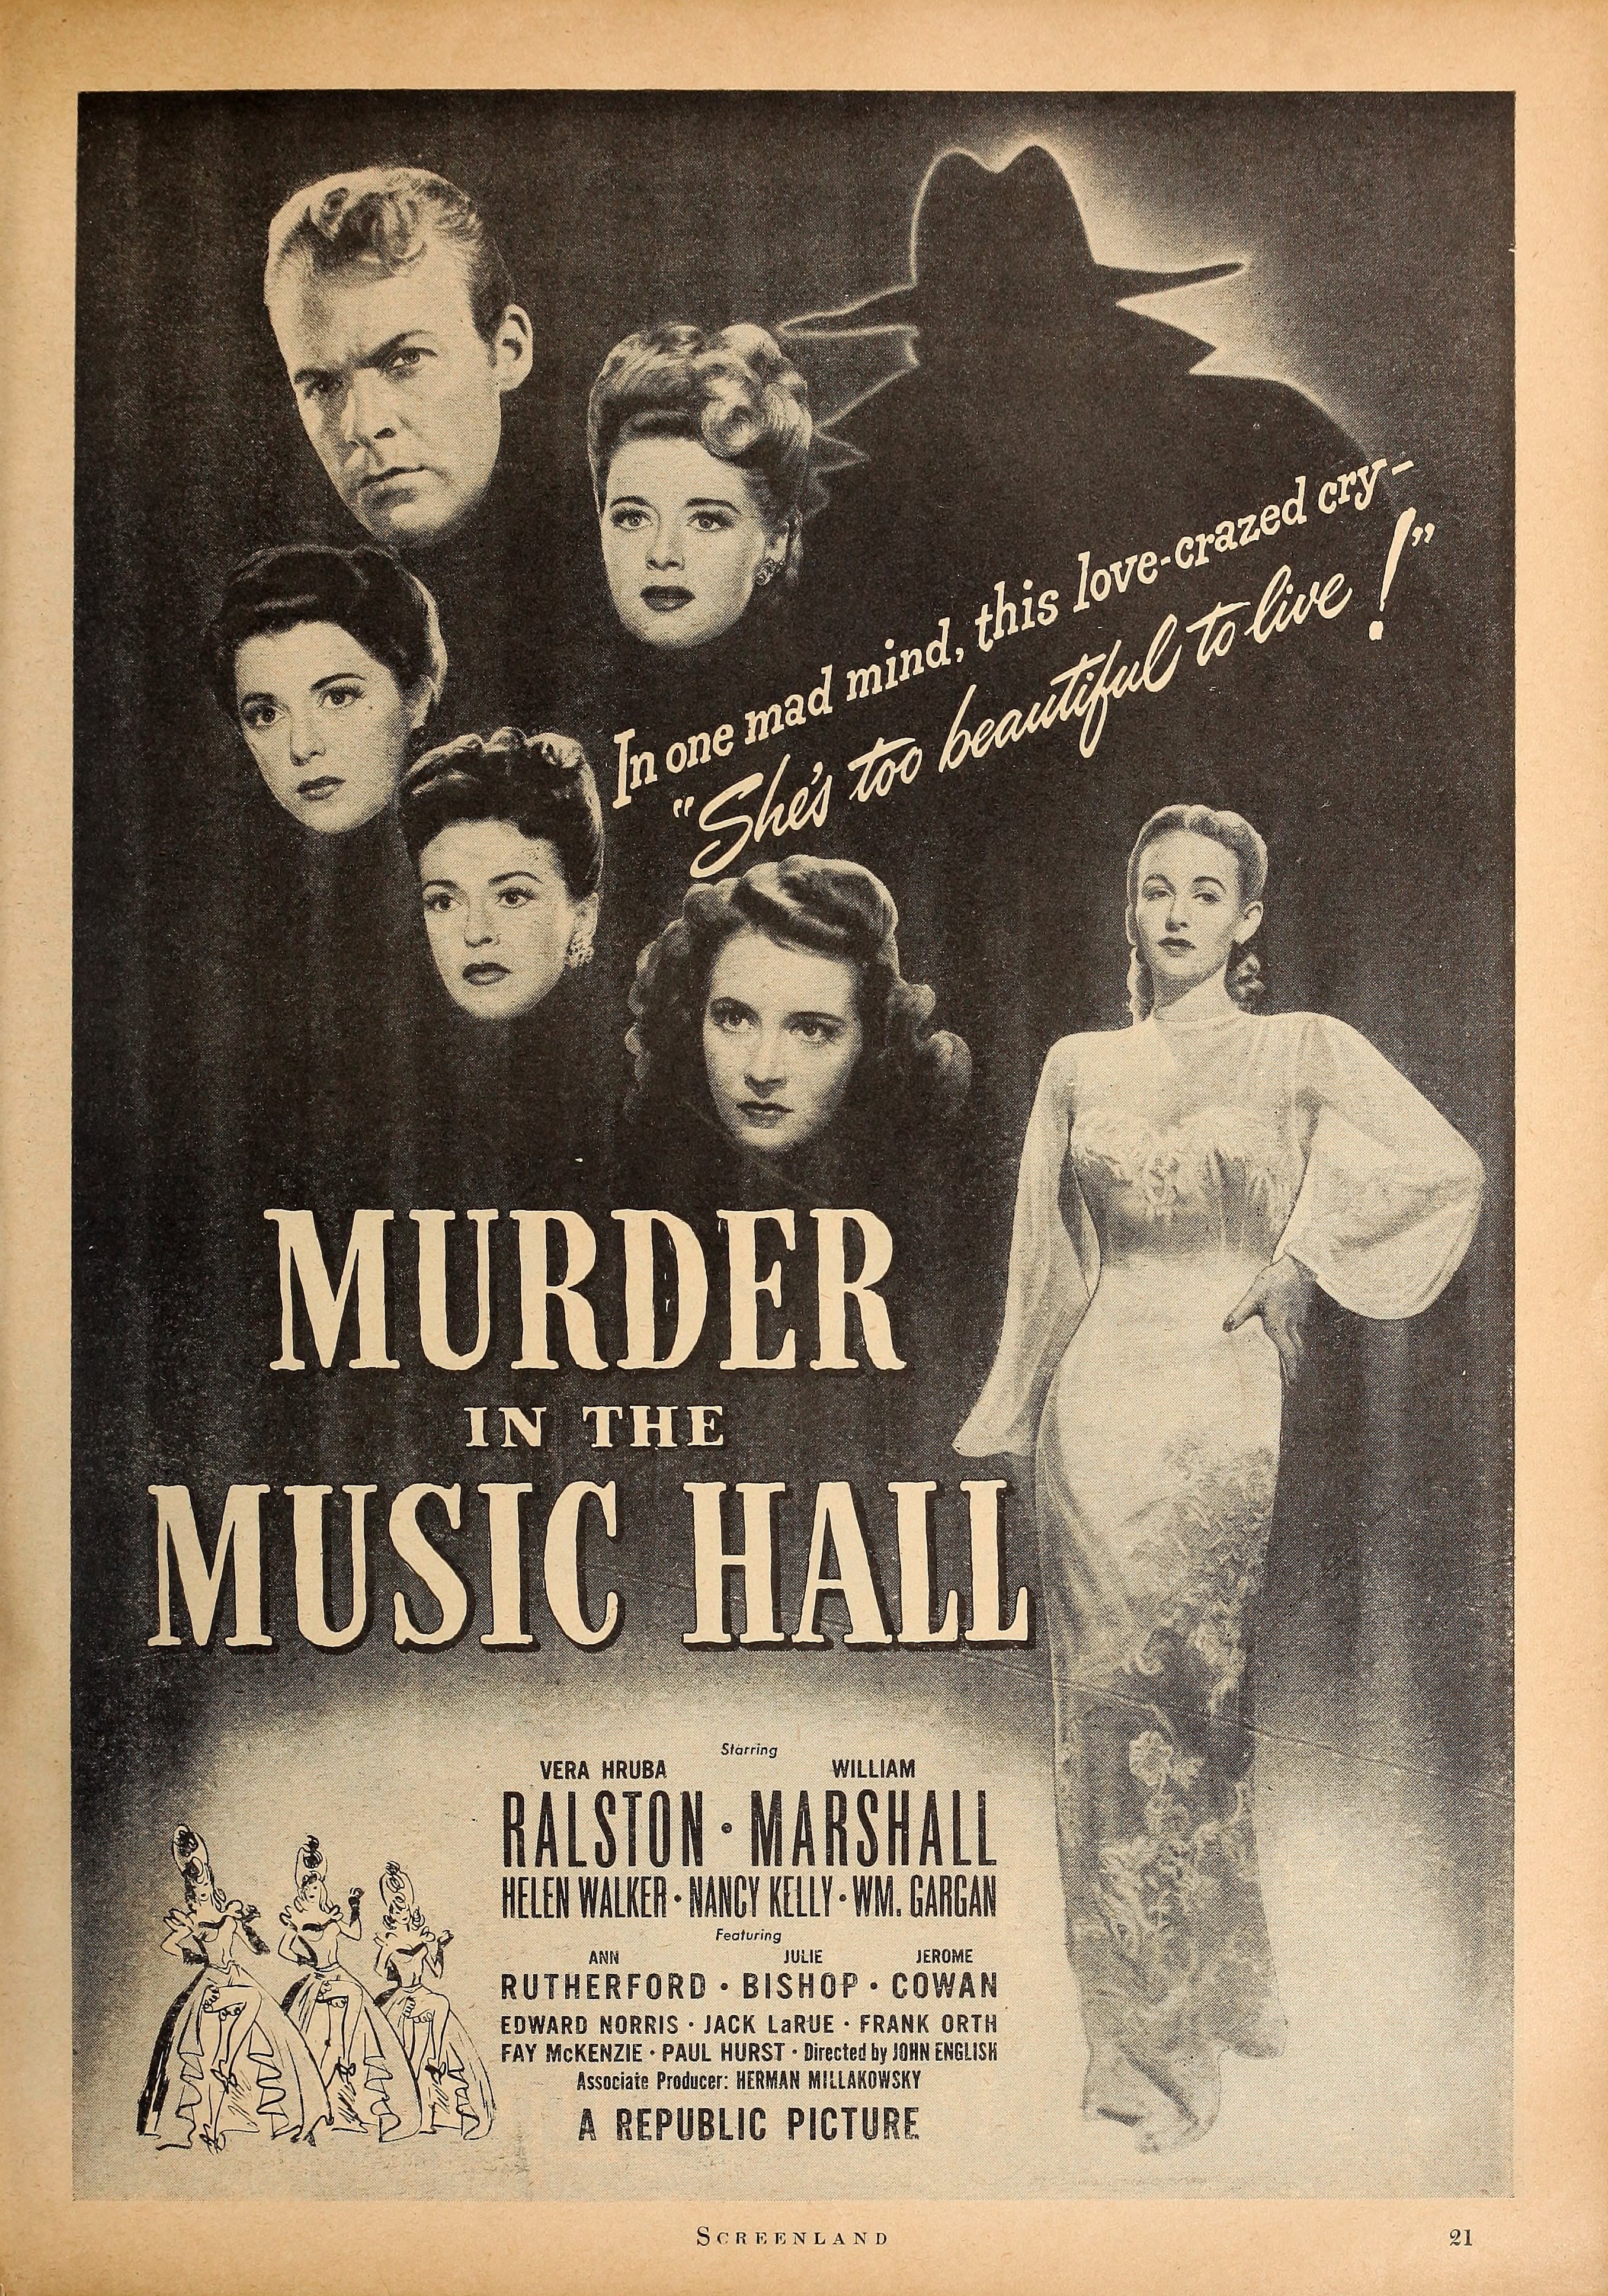 Murder in the Music Hall (1946) | www.vintoz.com